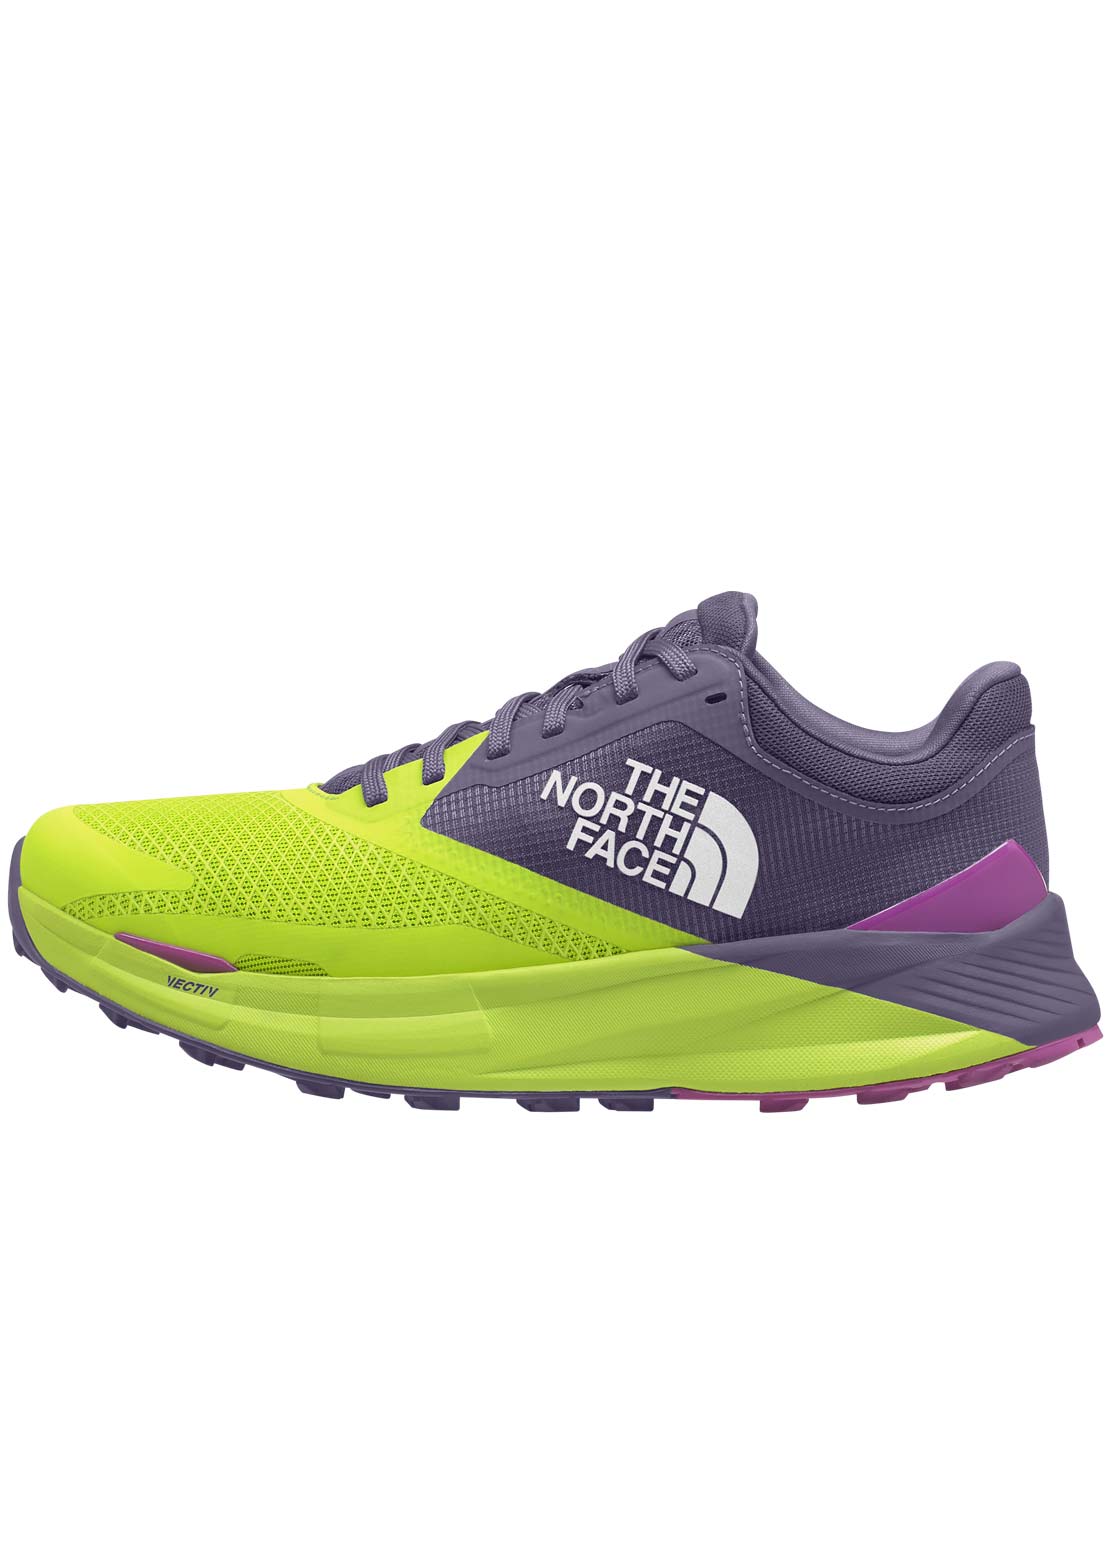 CHAUSSURE TRAIL FEMME THE NORTH FACE VECTIV ENDURIS II